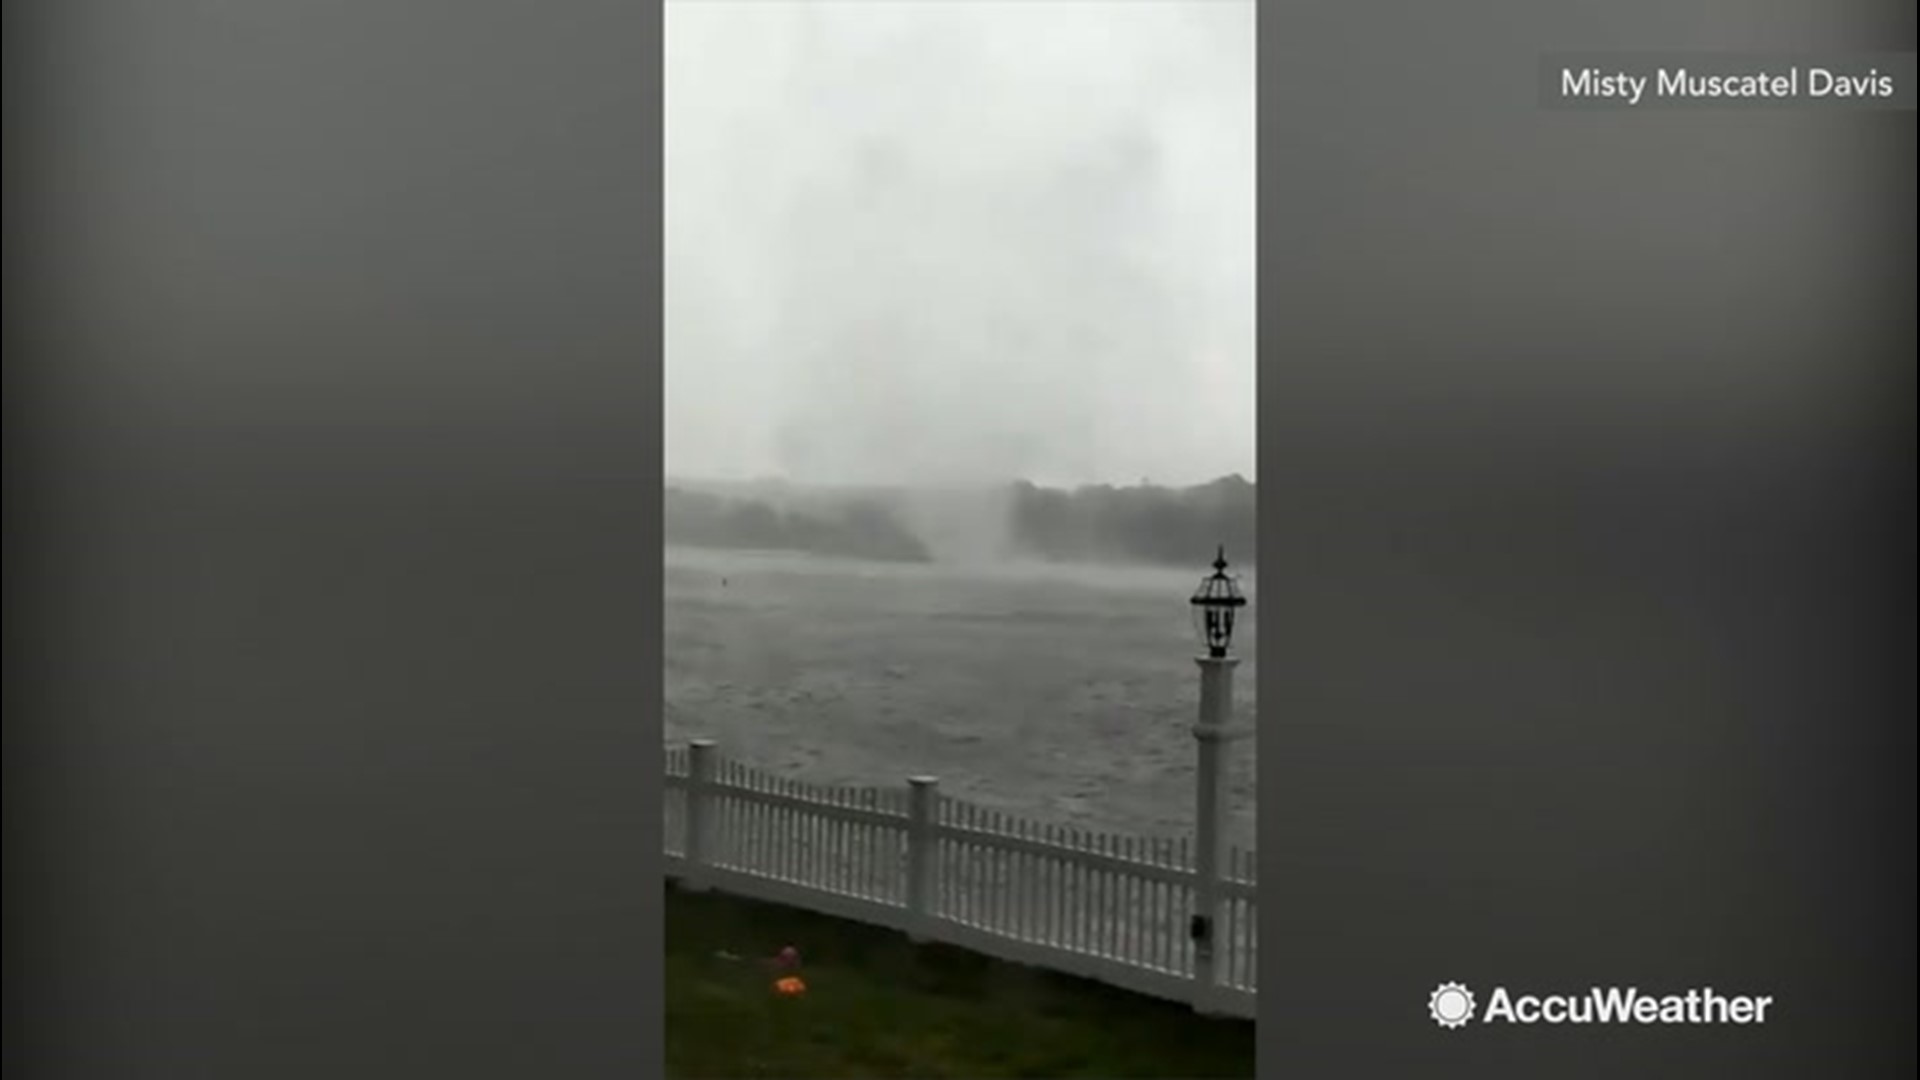 A waterspout was spotted in South Yarmouth, Massachusetts on July 23, at 12:15pm.